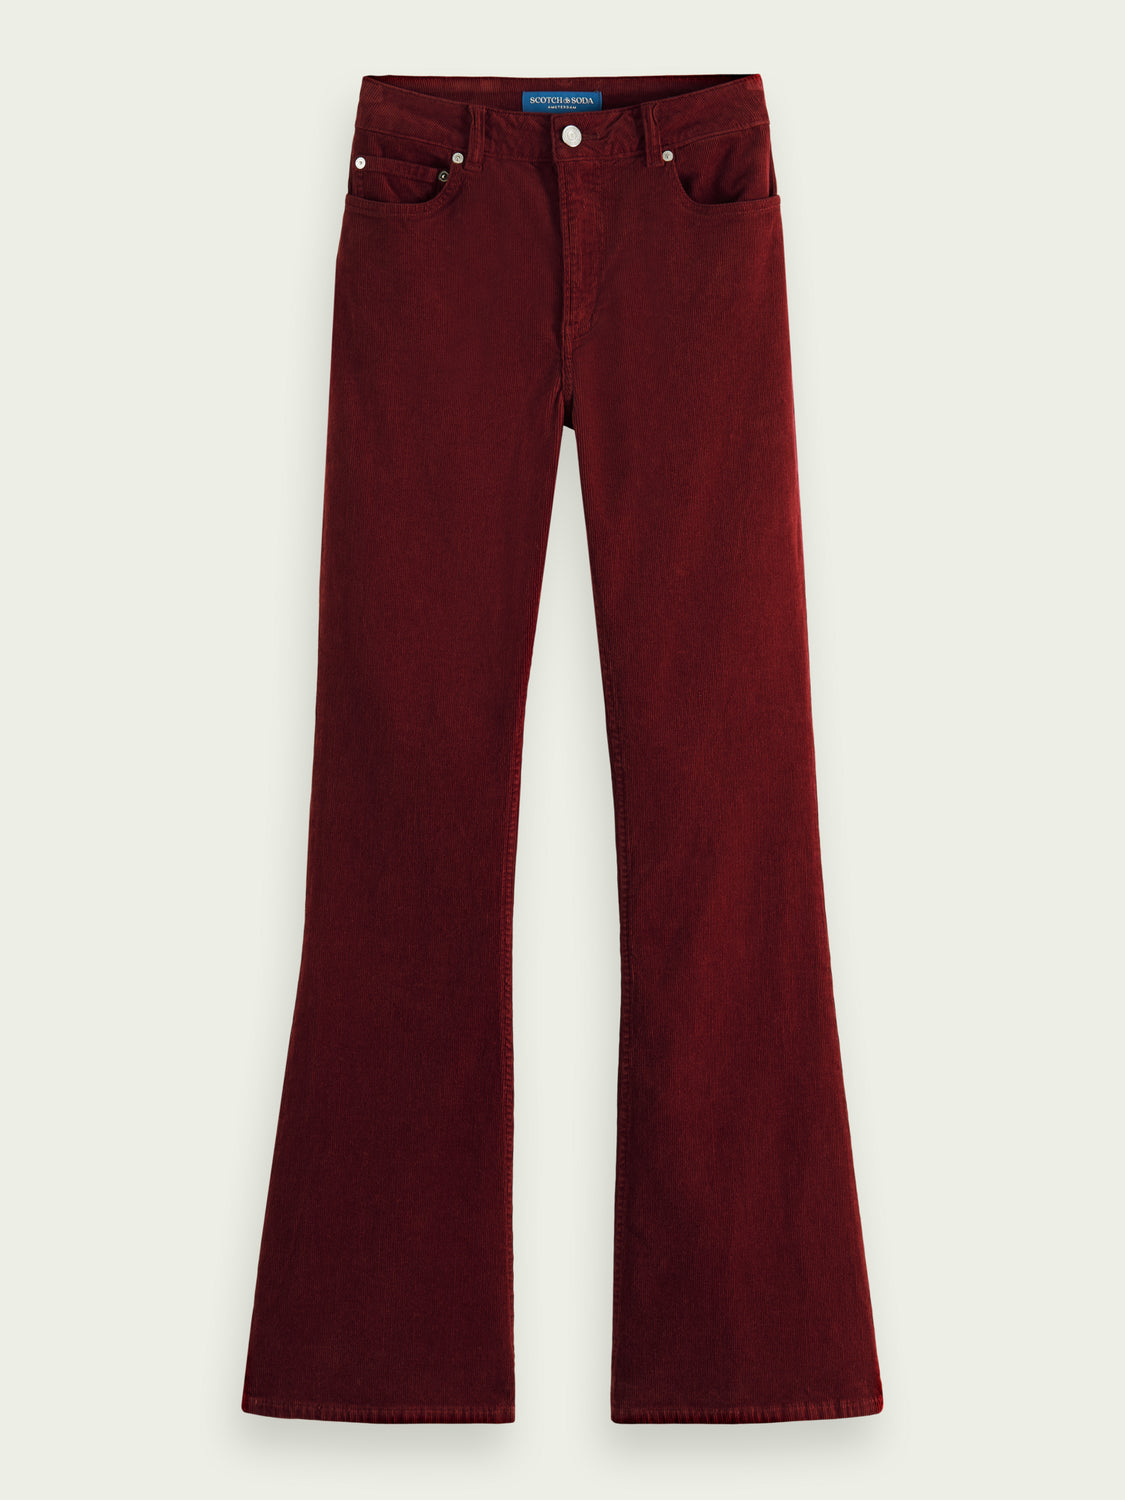 The Charm Pant in Zinfandel